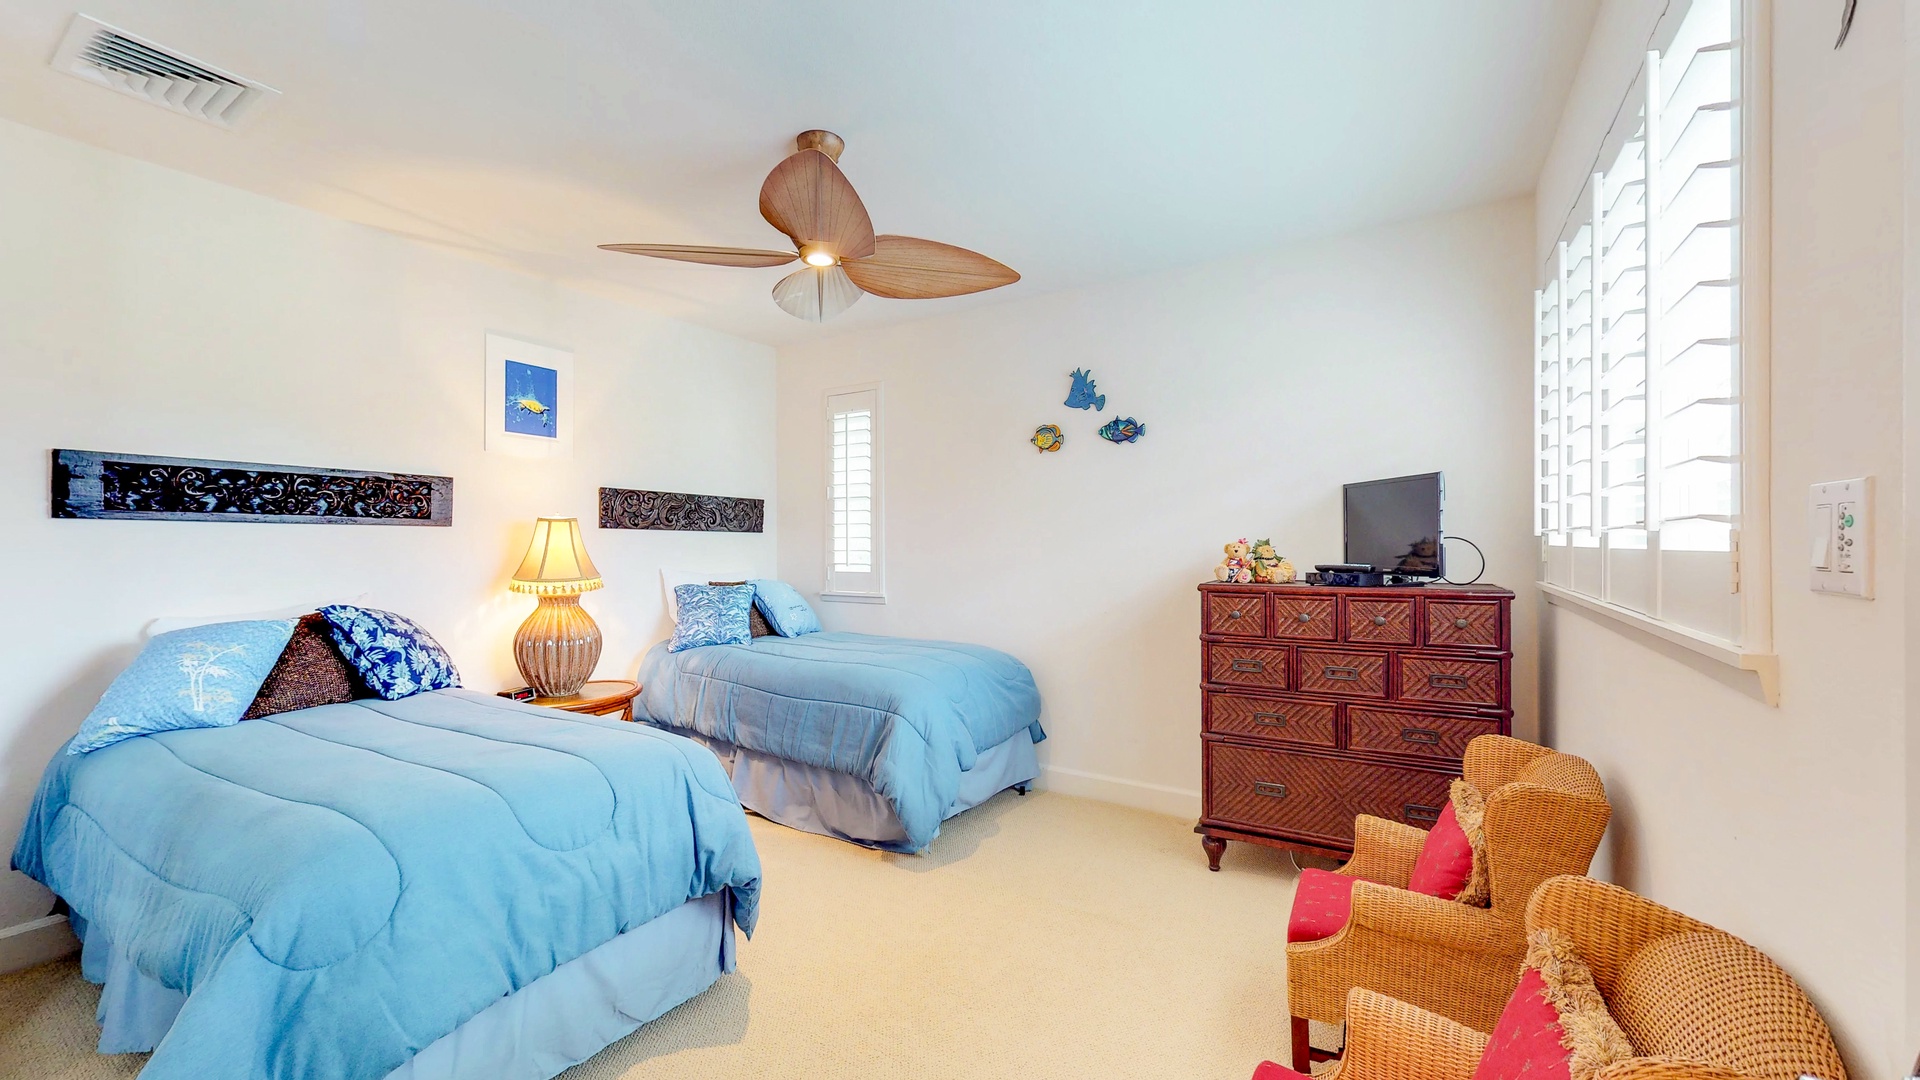 Kapolei Vacation Rentals, Ko Olina Kai 1105E - Third bedroom with twin beds, perfect for the little ones.